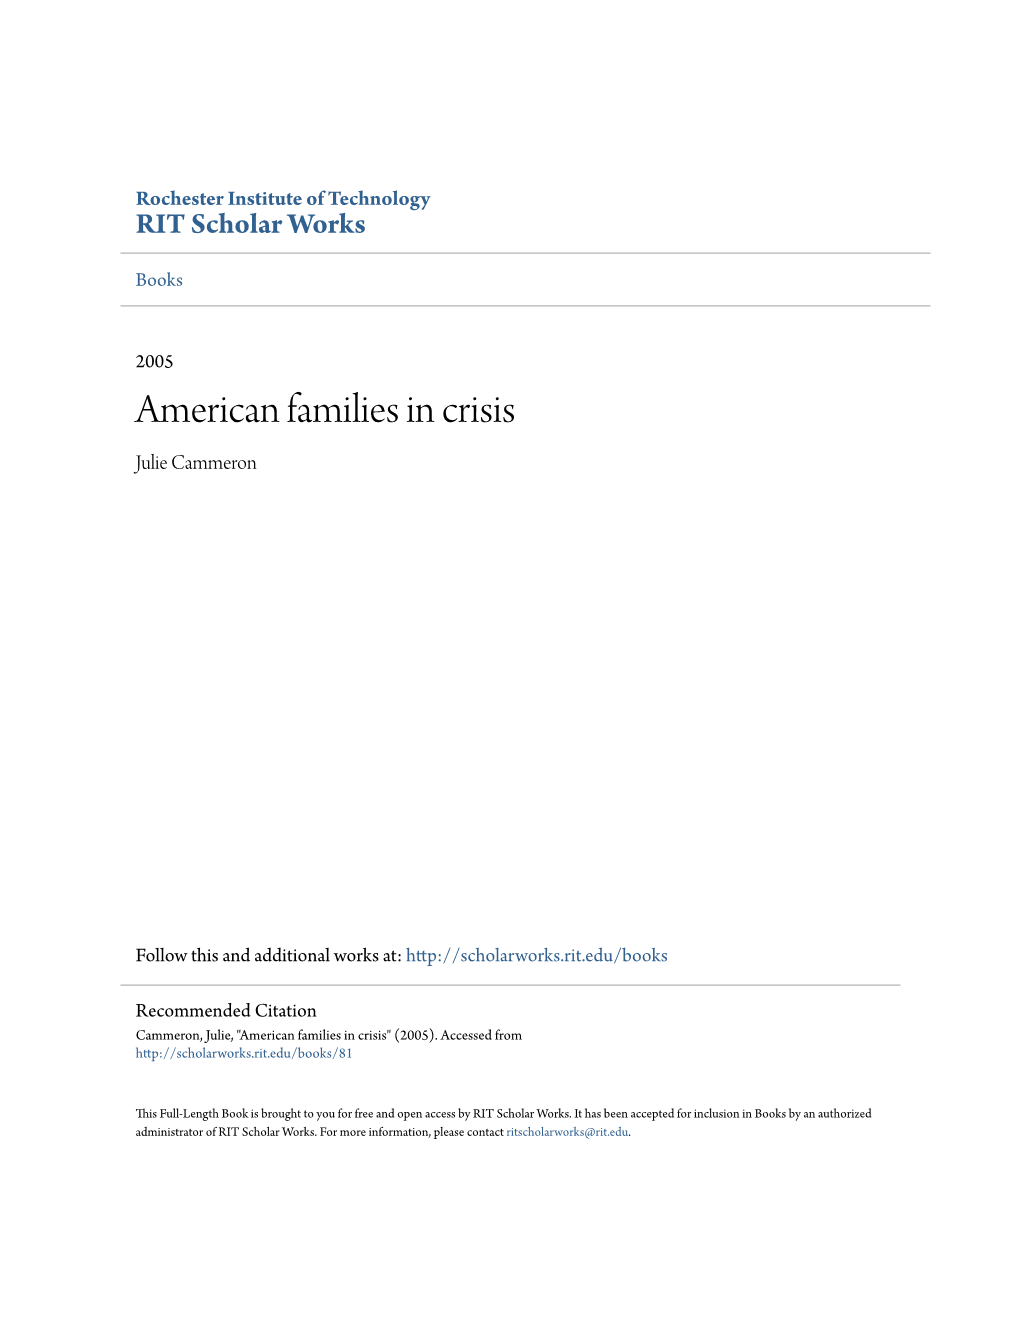 American Families in Crisis Julie Cammeron